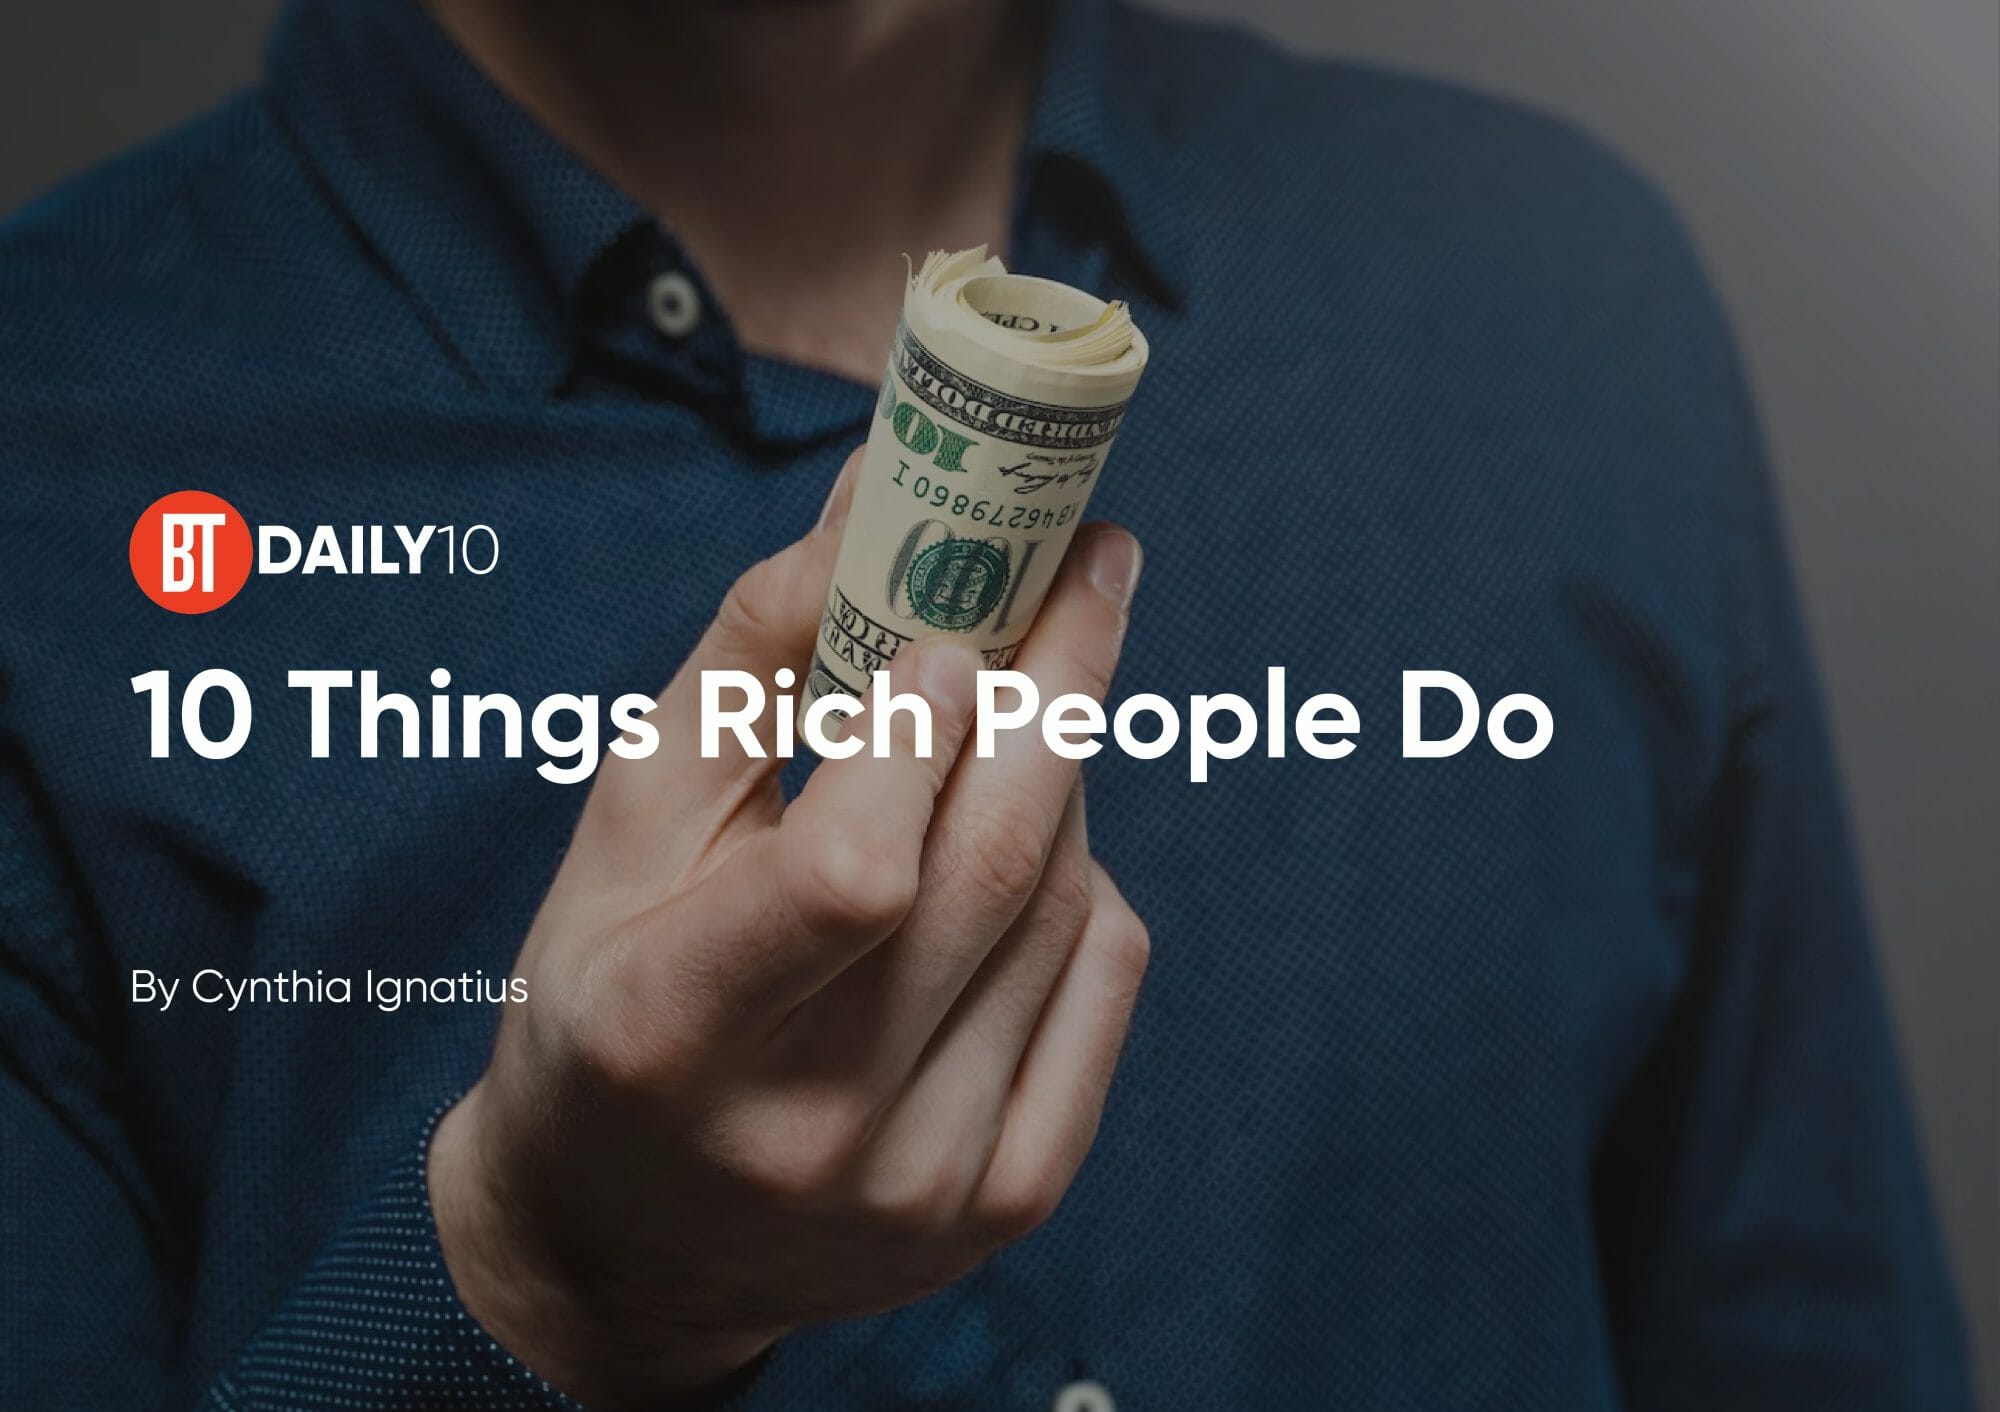 Money People Rich 10 | Things Habits: Do BusinessToday